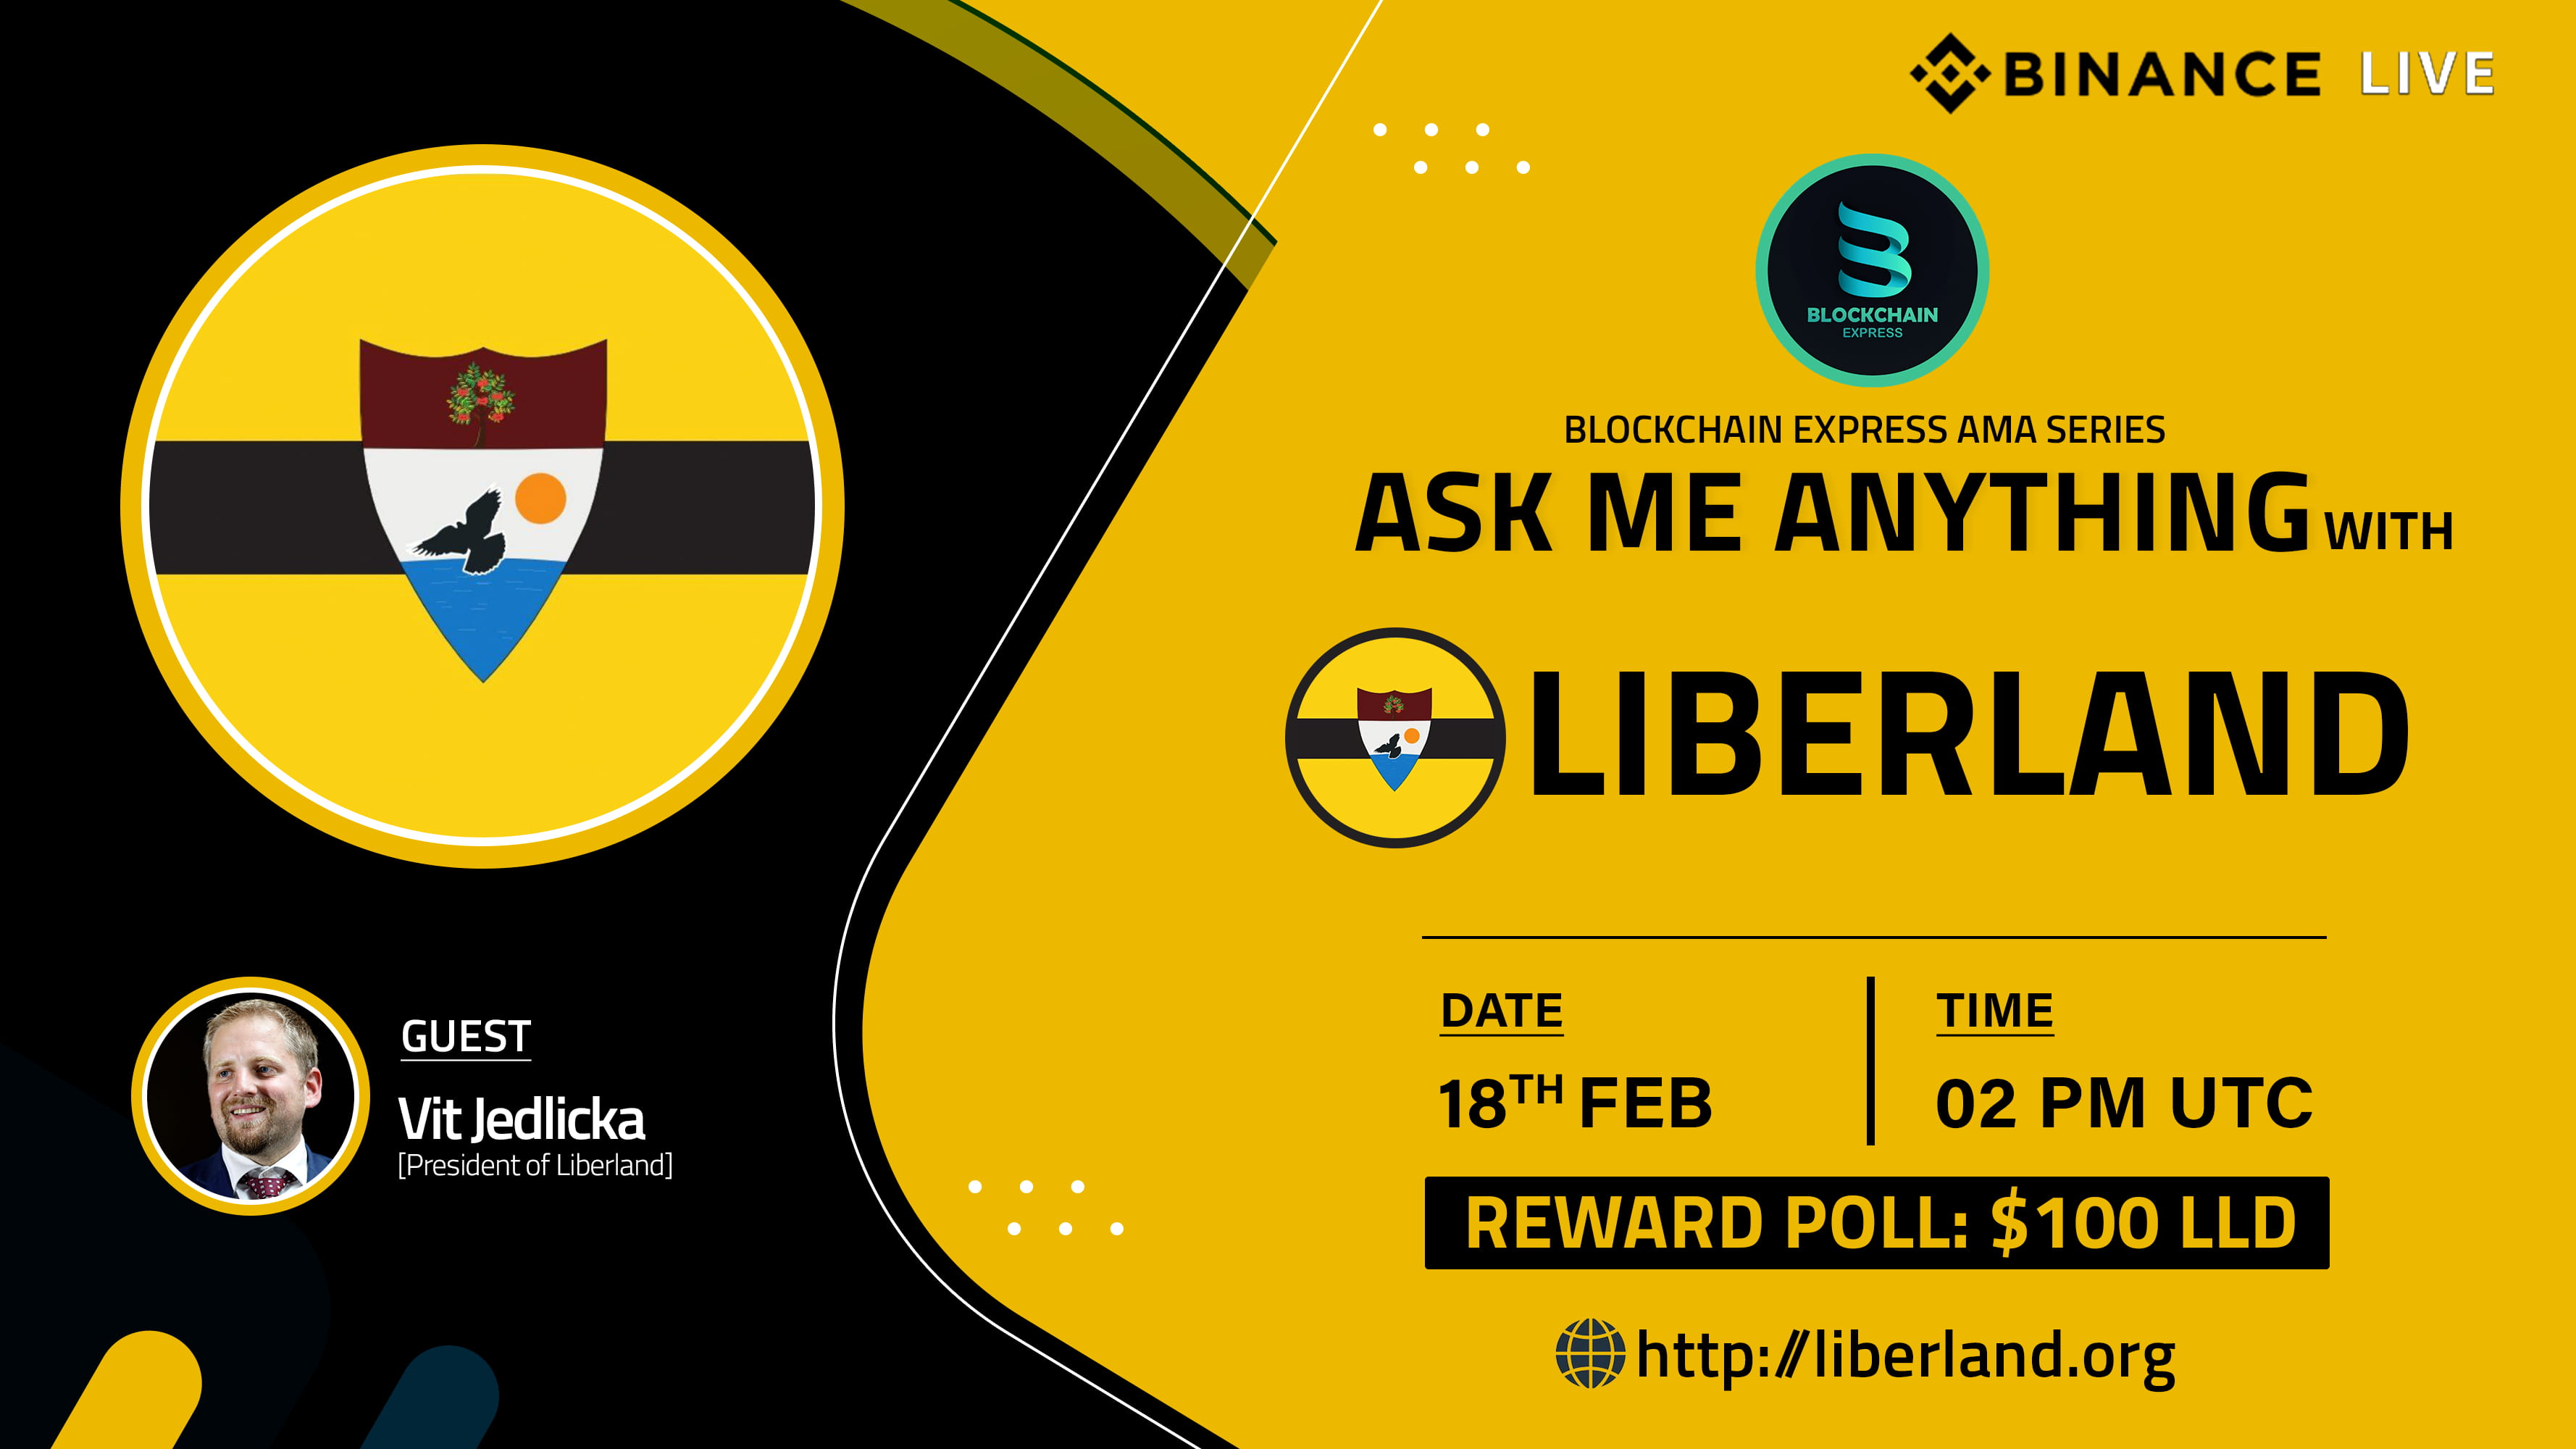 ₿lockchain Express will be hosting an session with" Liberland "